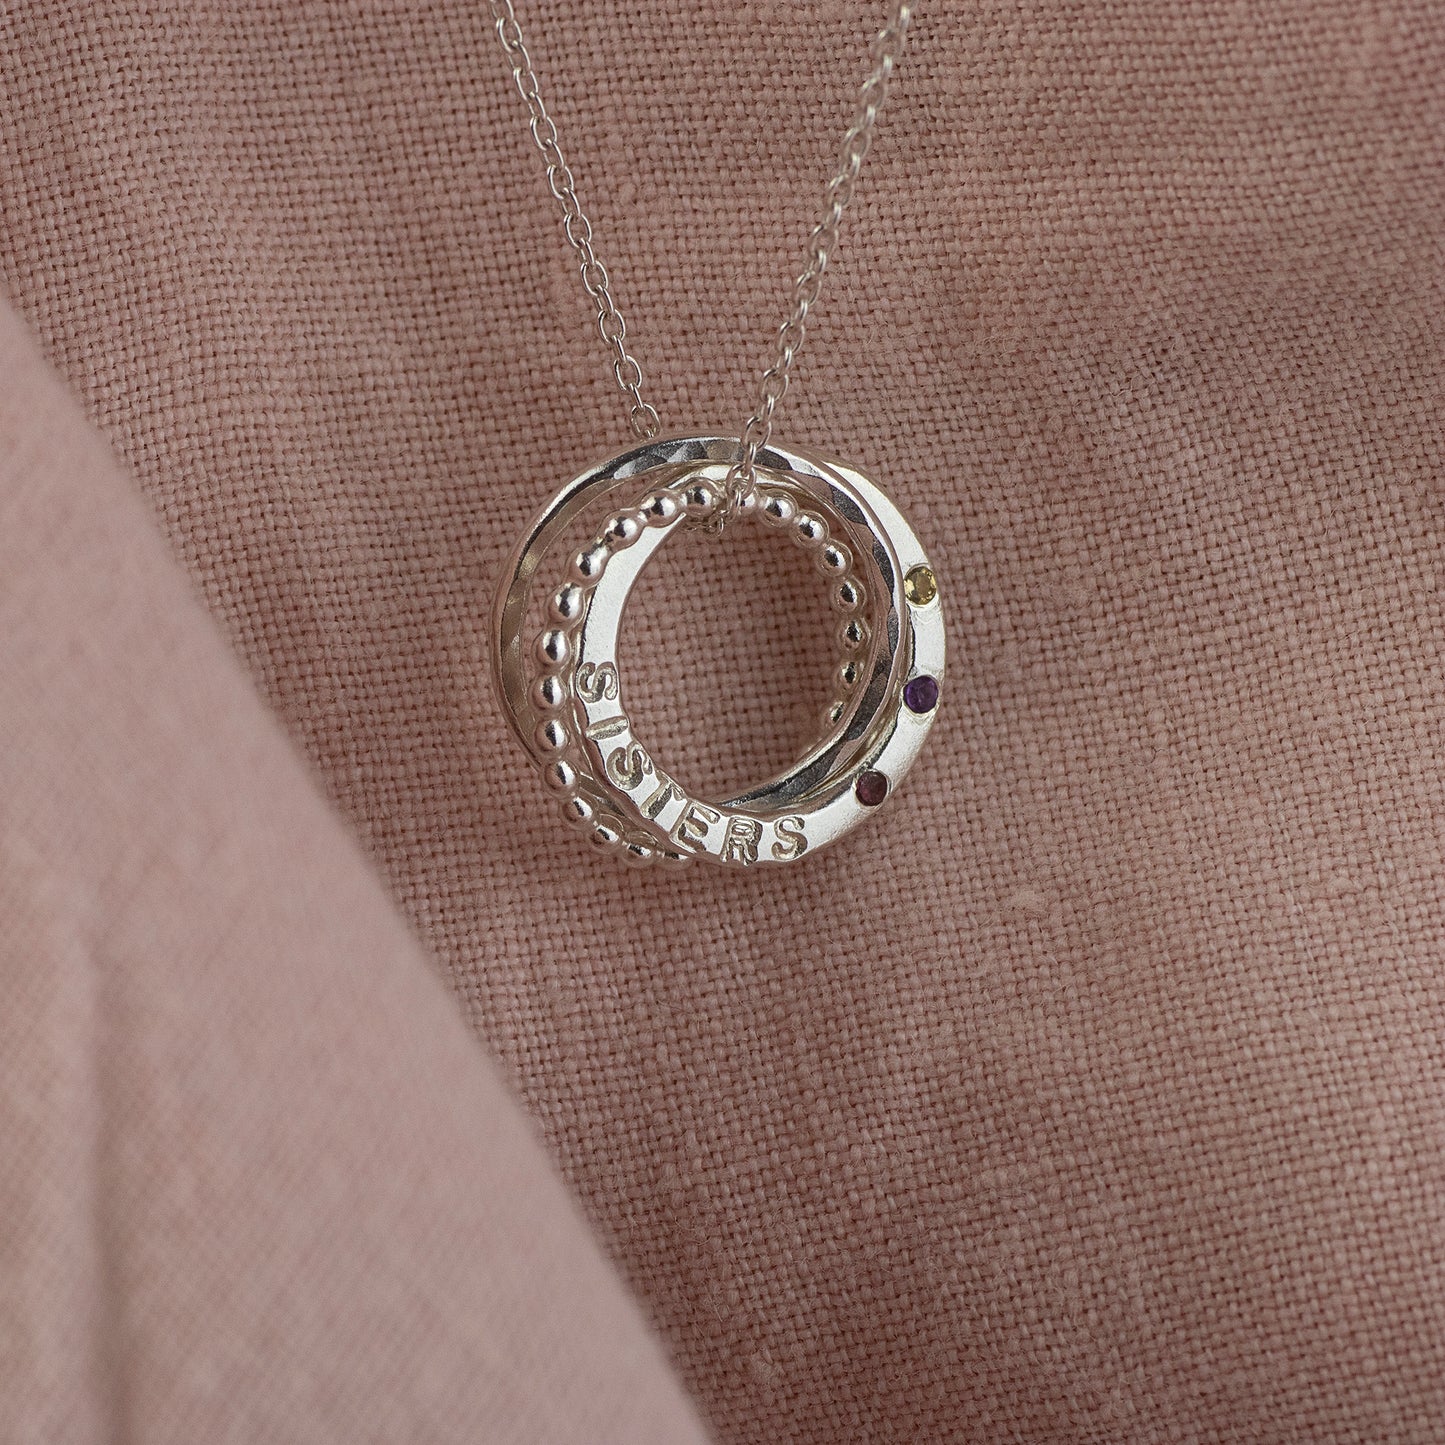 Personalised 3 Sisters Birthstone Necklace - Linked for a Lifetime® - Petite Silver